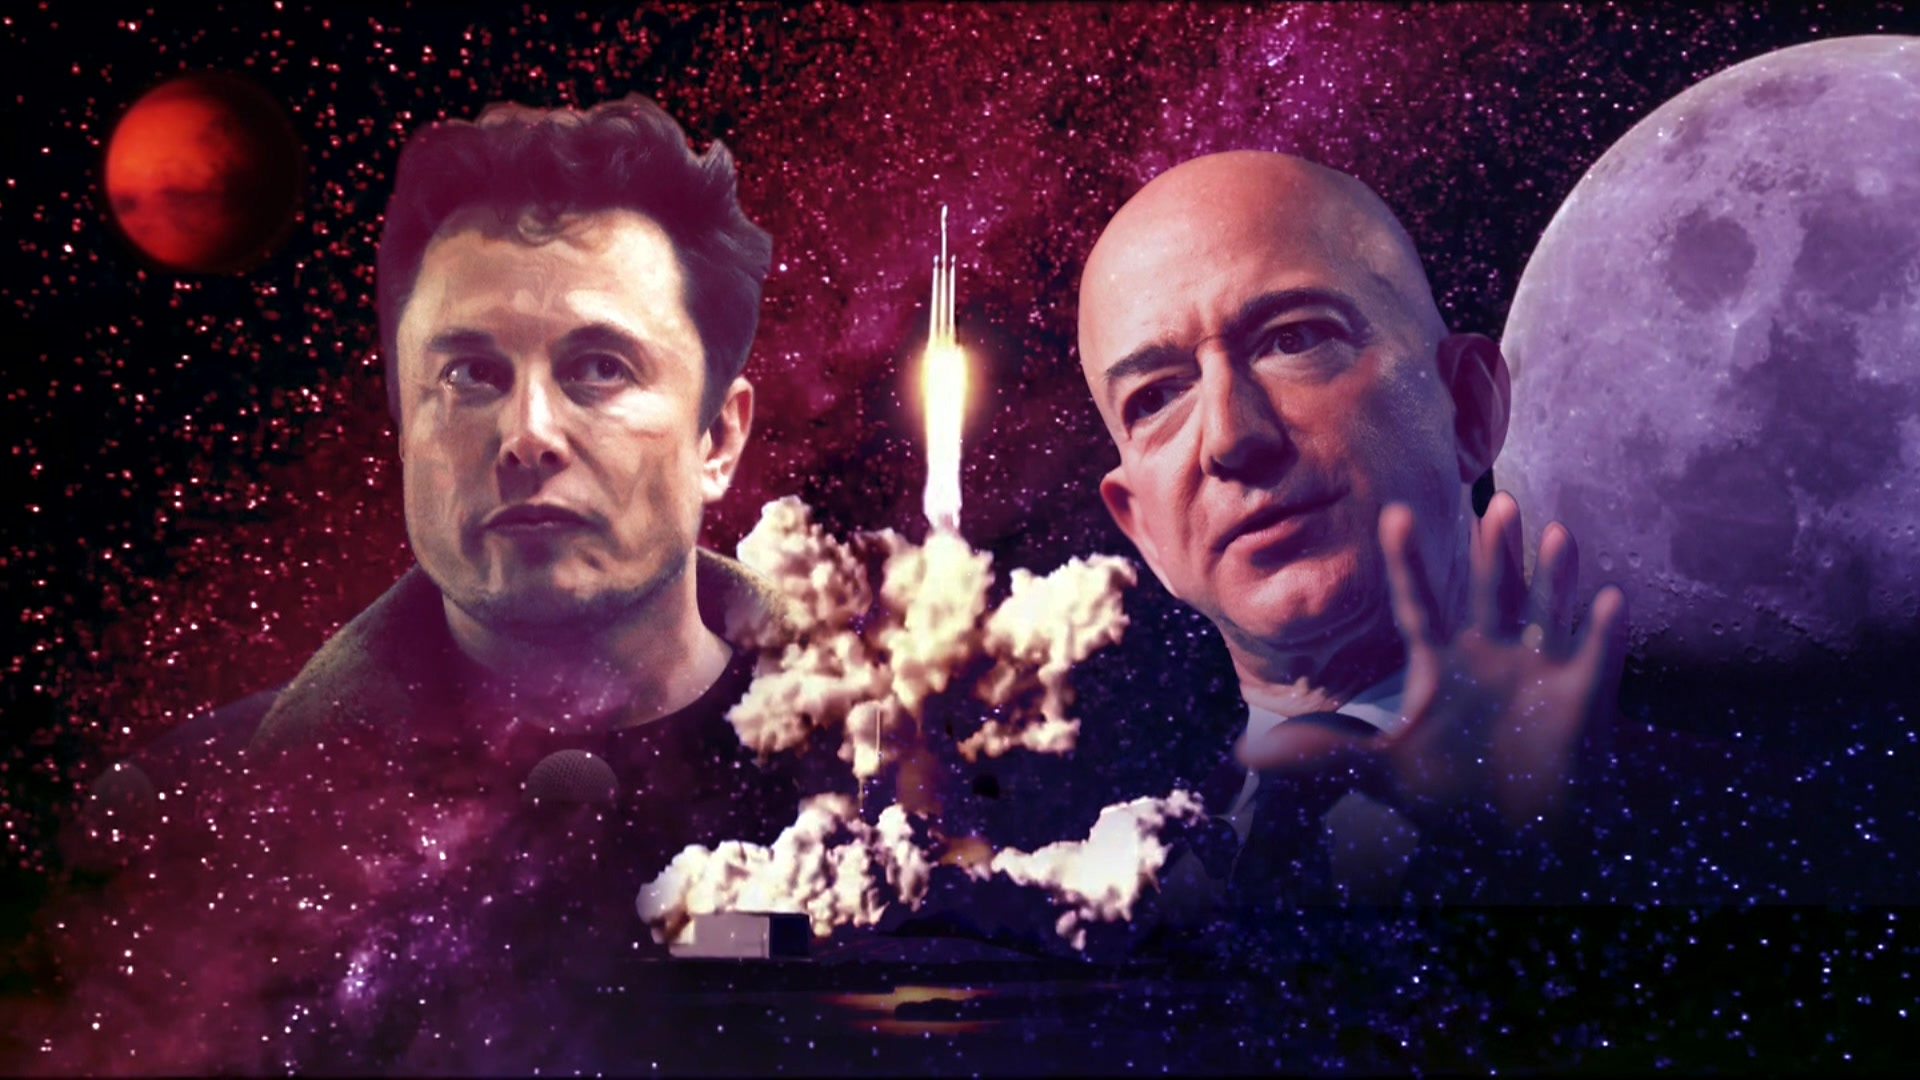 Elon Musk and Jeff Bezos: The Silicon Valley space race - BBC News